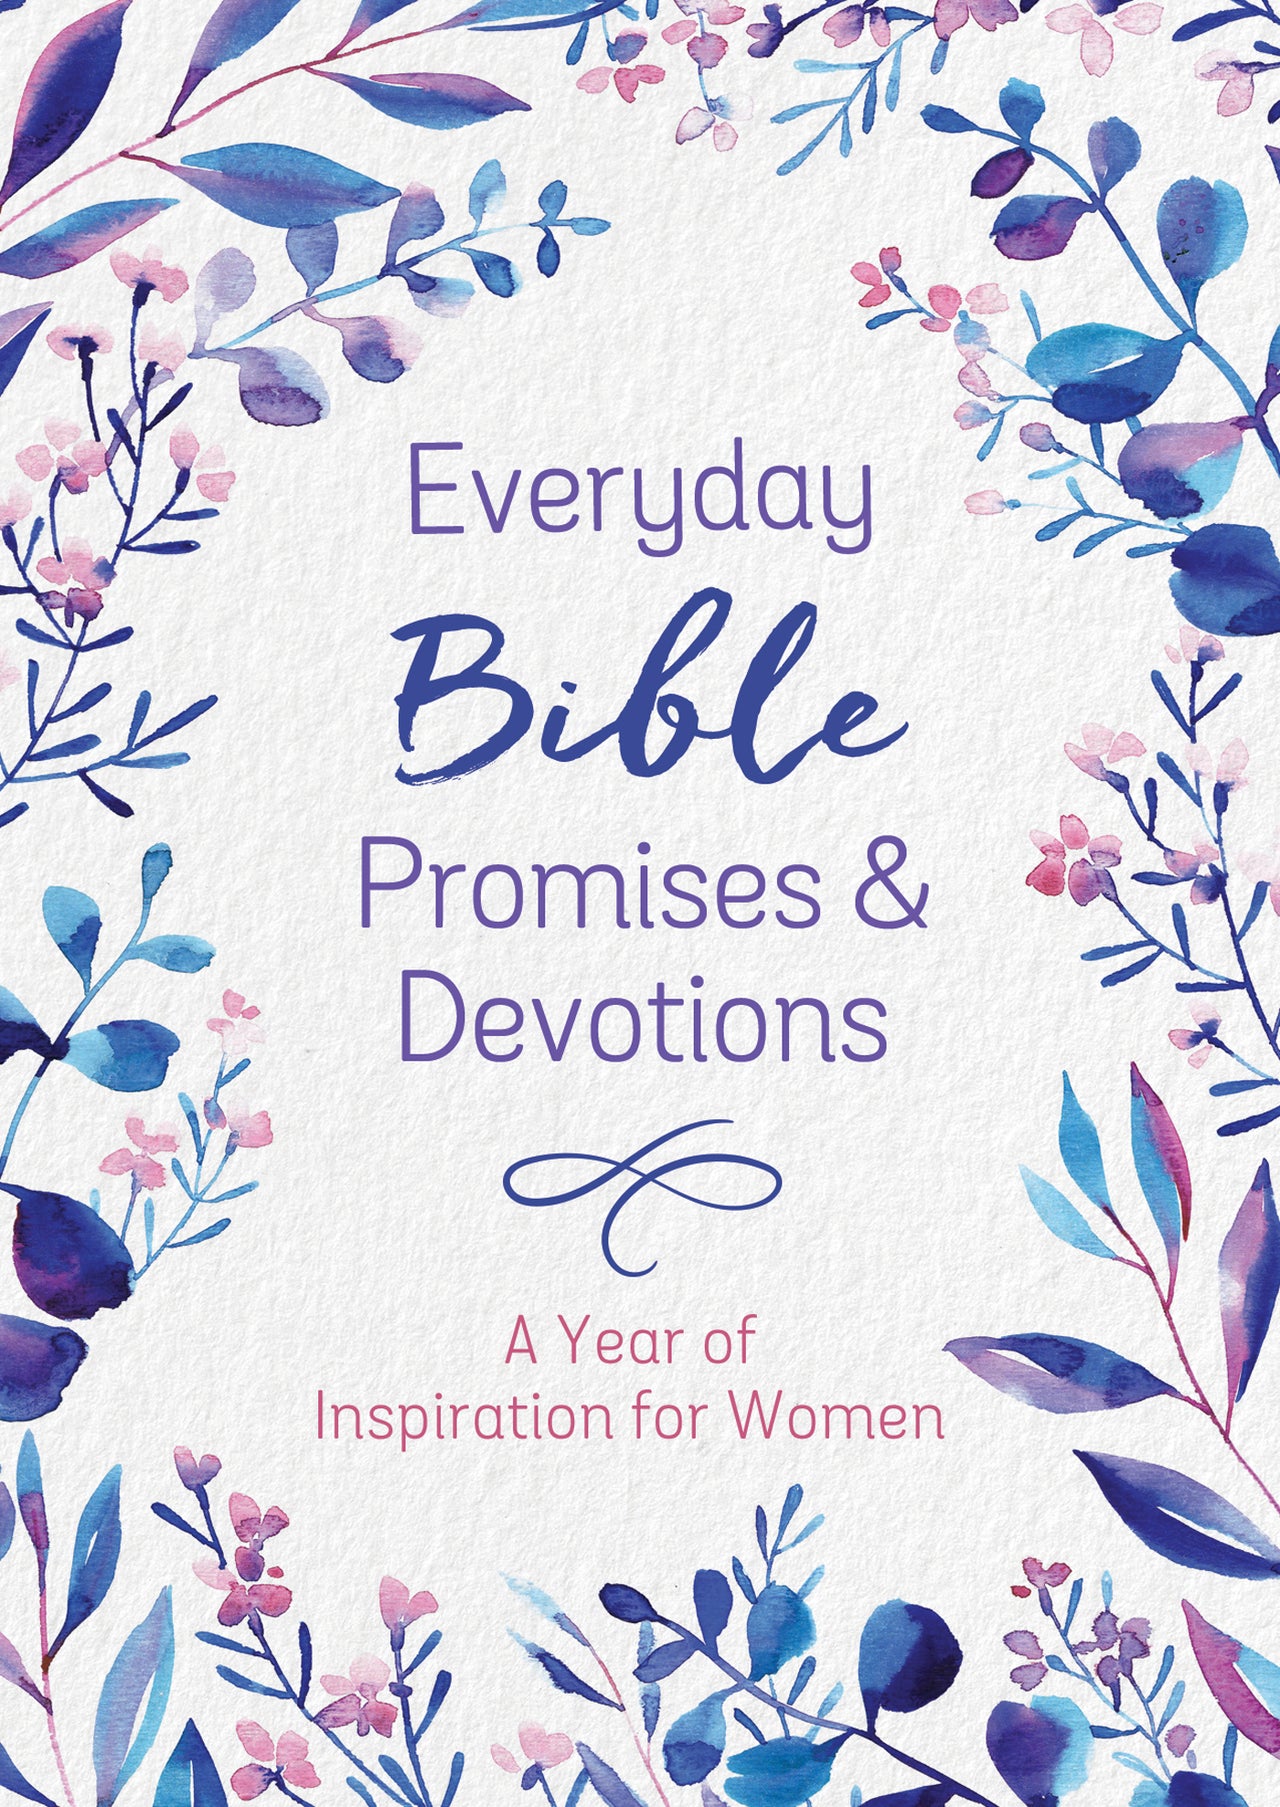 Everyday Bible Promises and Devotions - Mercantile Mountain